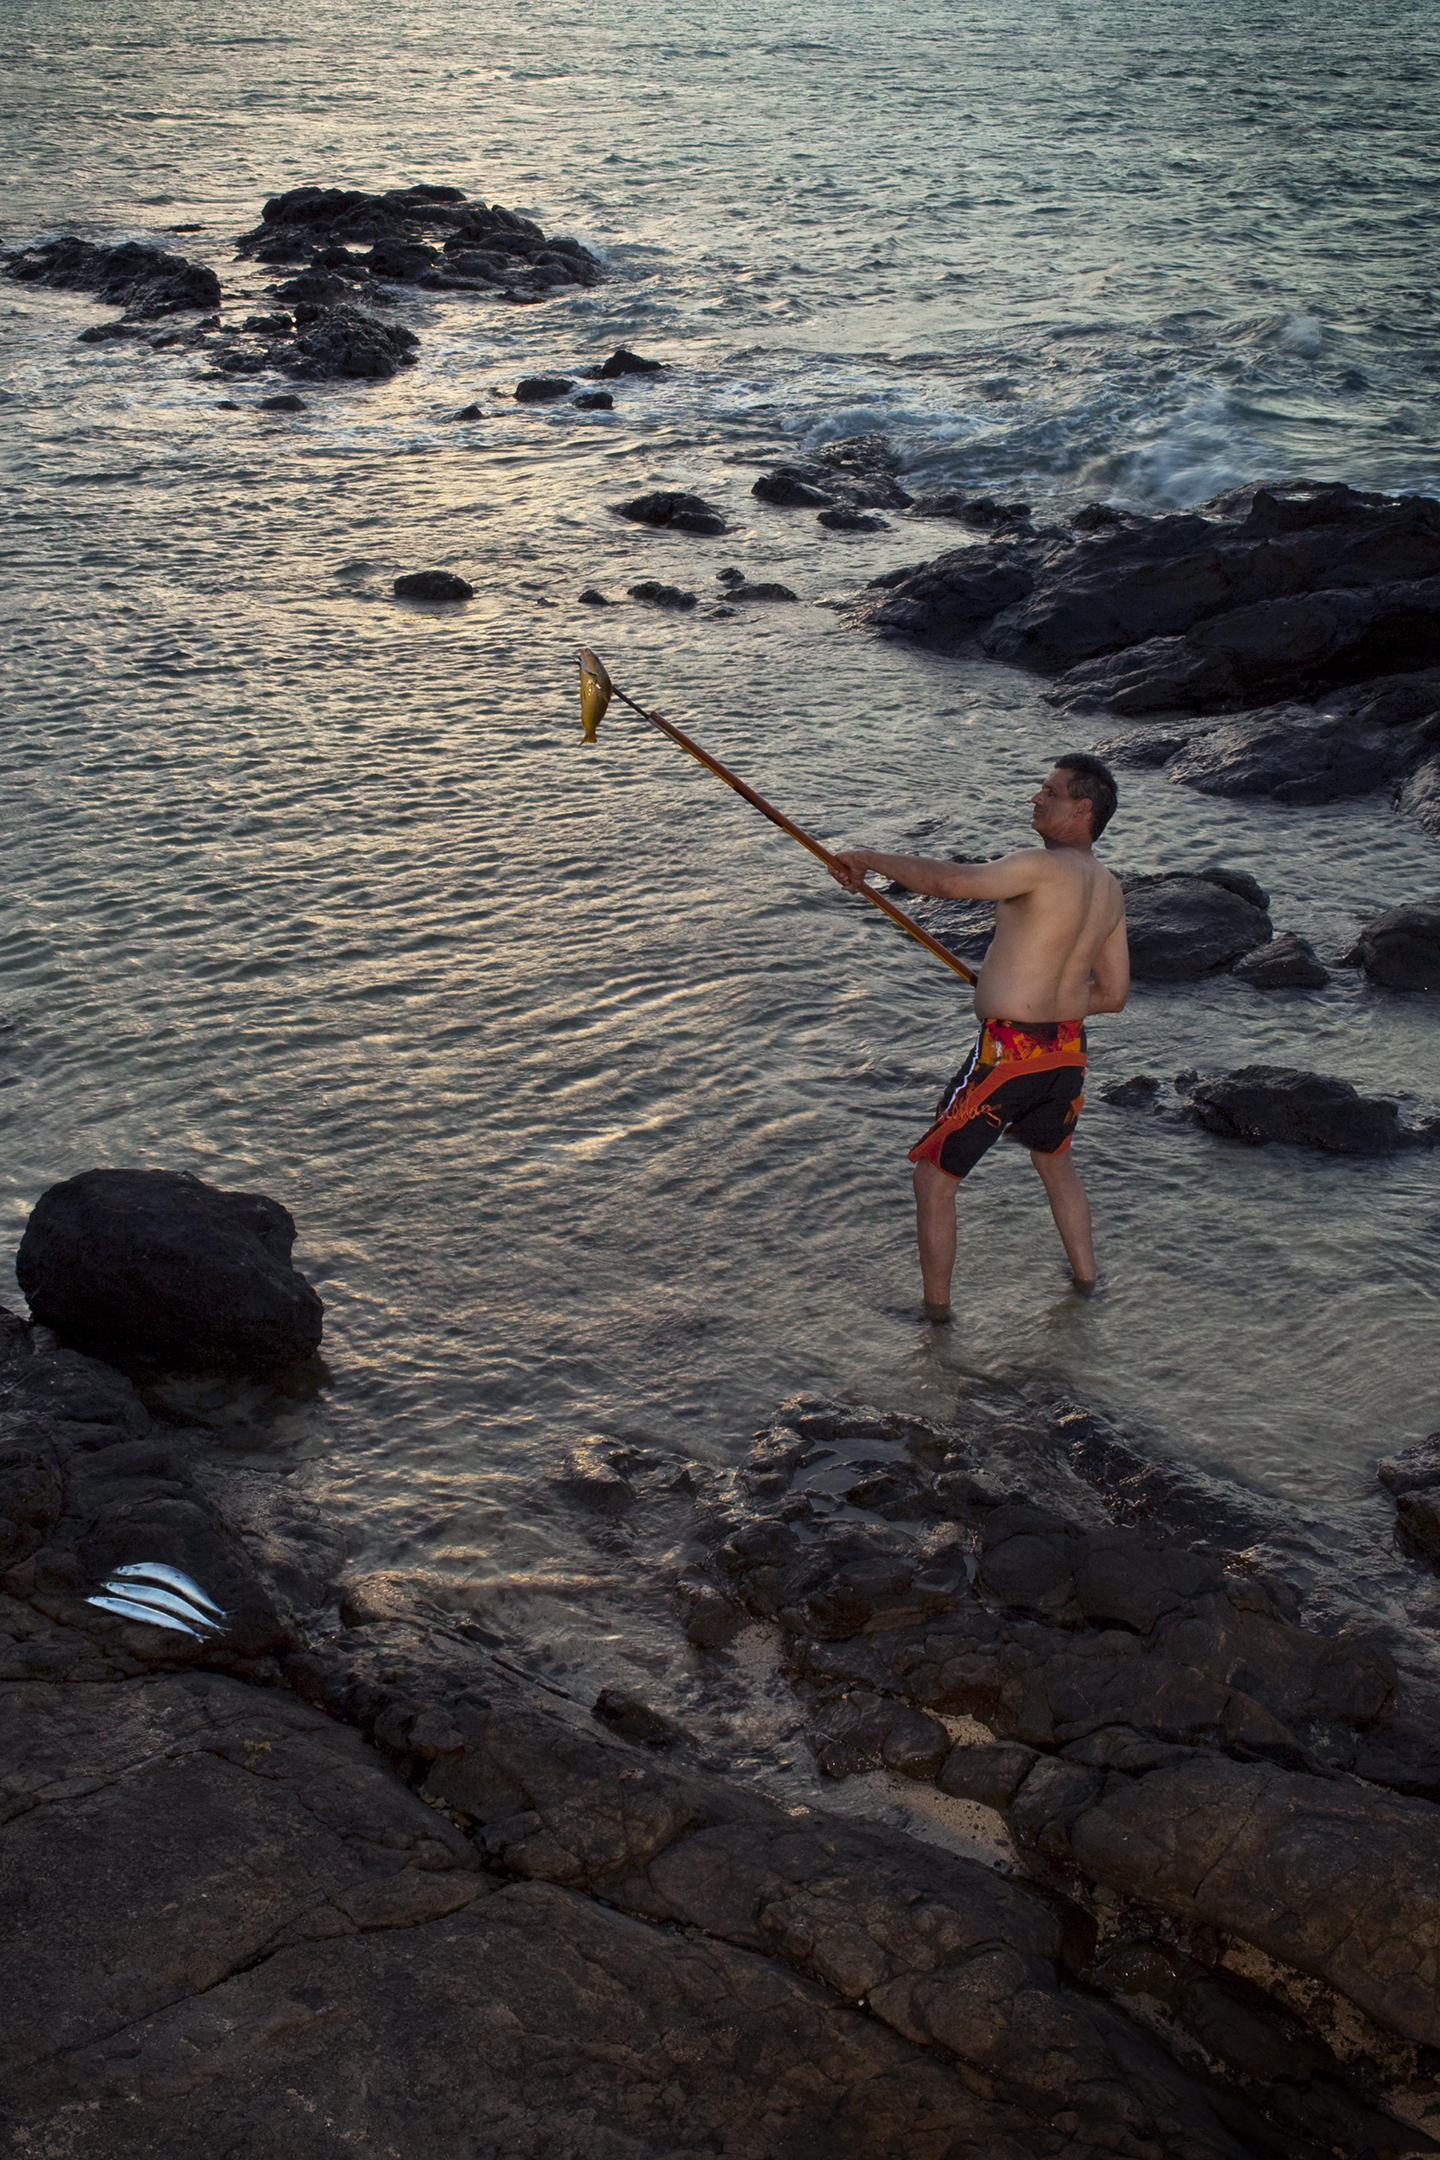 Cousin Rob as a Spear Fisherman